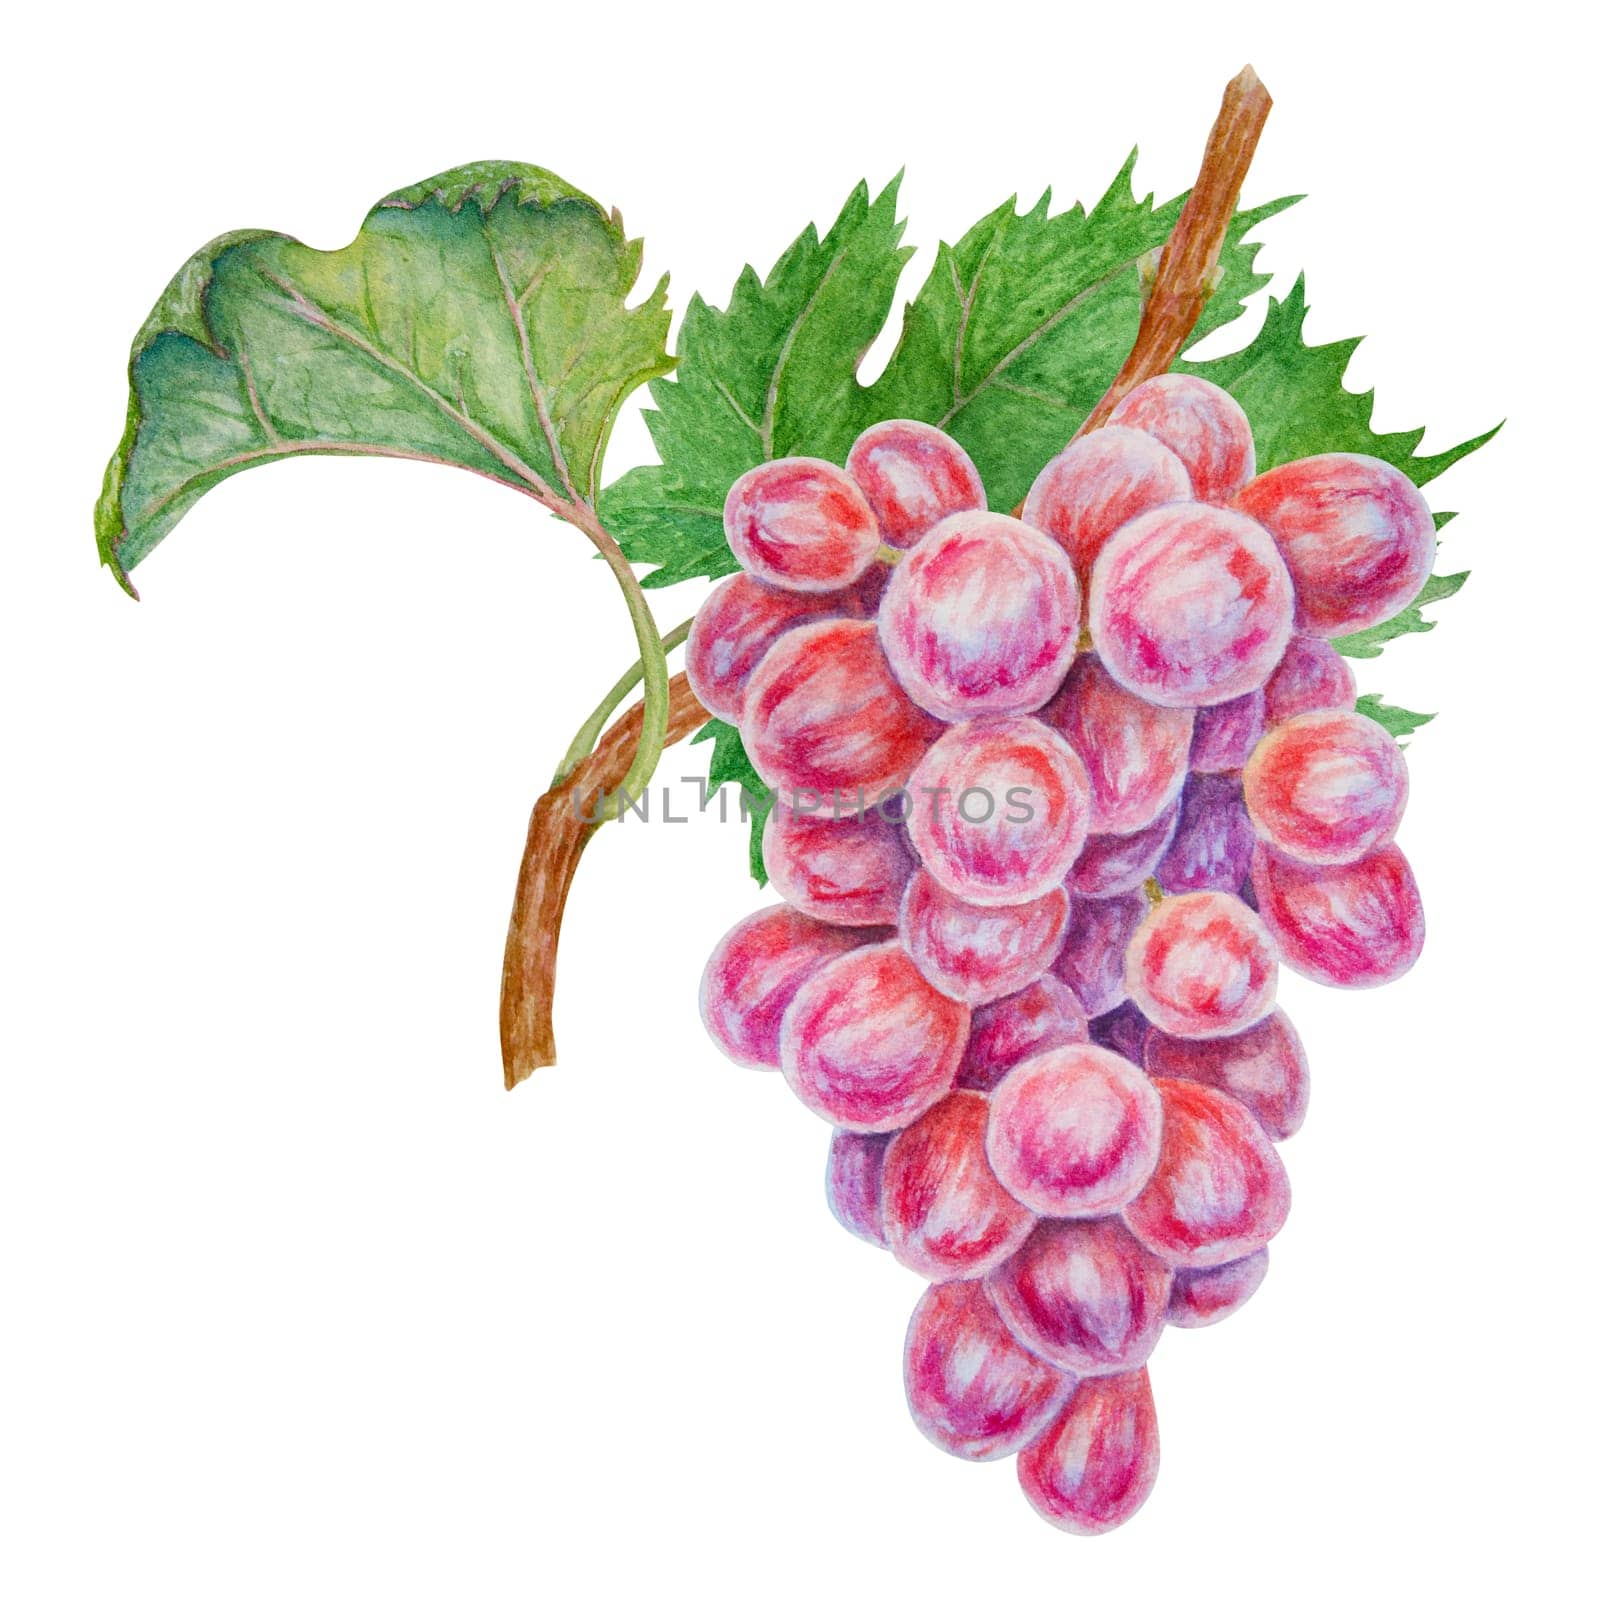 A bunch of dark grapes. Watercolor hand drawn botanical illustration. Ingredient in wine, vinegar, juice, cosmetics. Clip art for menus of restaurants, cafes, packaging of farm goods, vegan products.